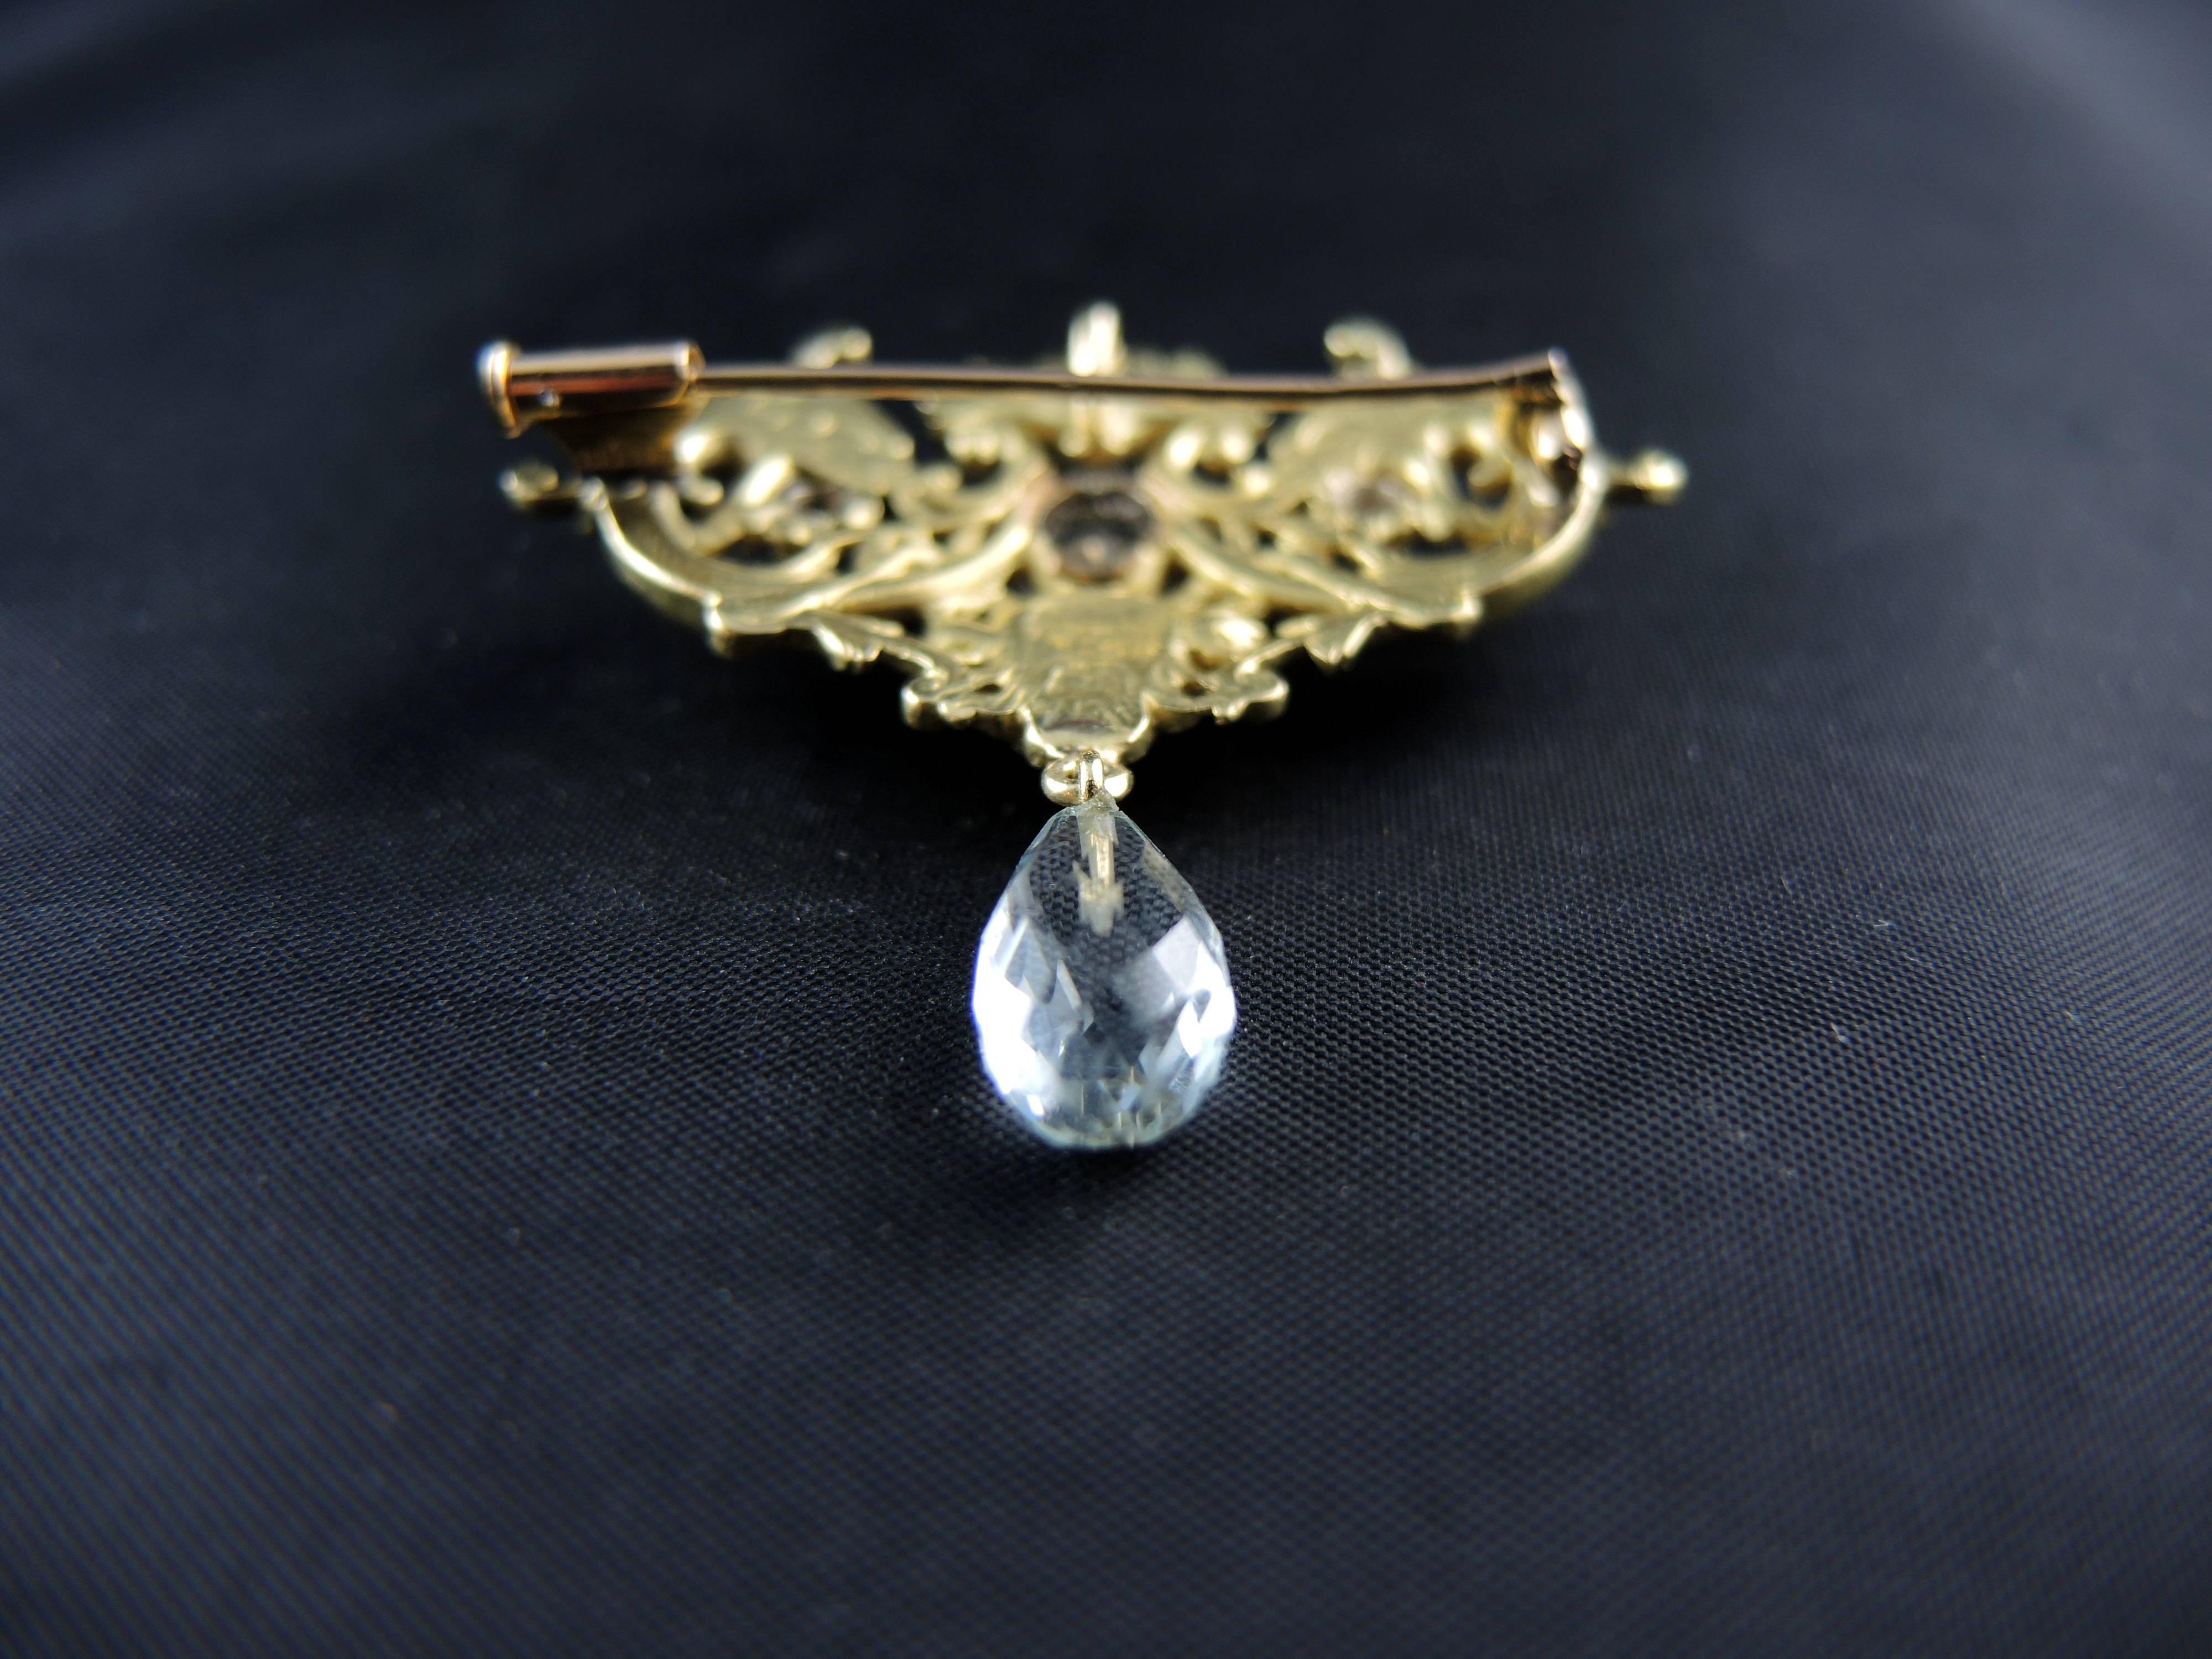 Women's or Men's Antique Gold Brooch with Diamonds and Aquamarine, 19th Century